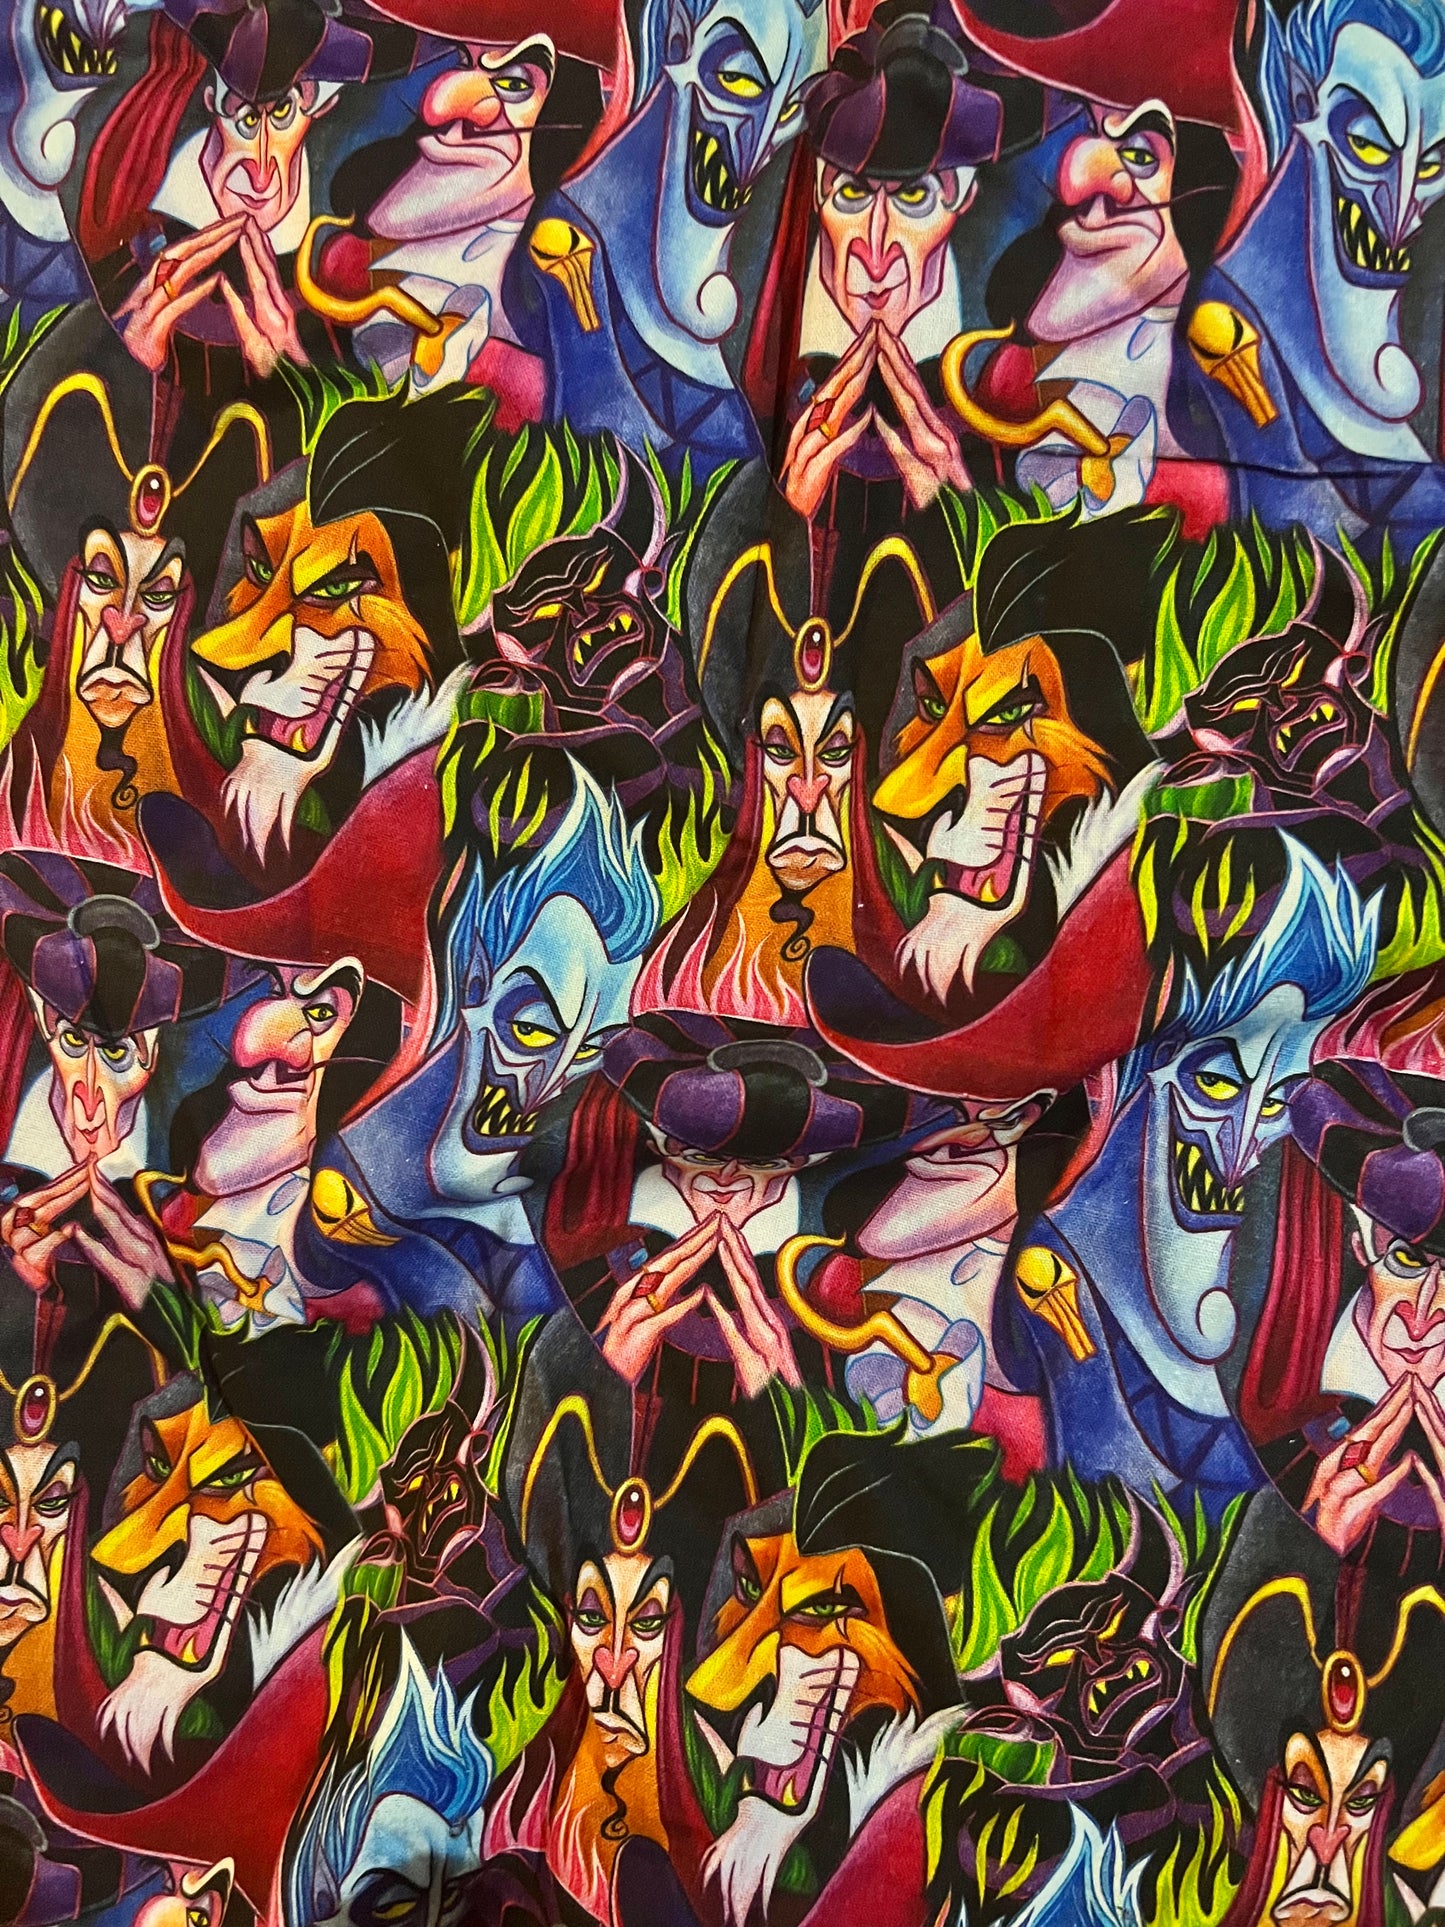 VILLAINS - Polycotton Fabric from Japan